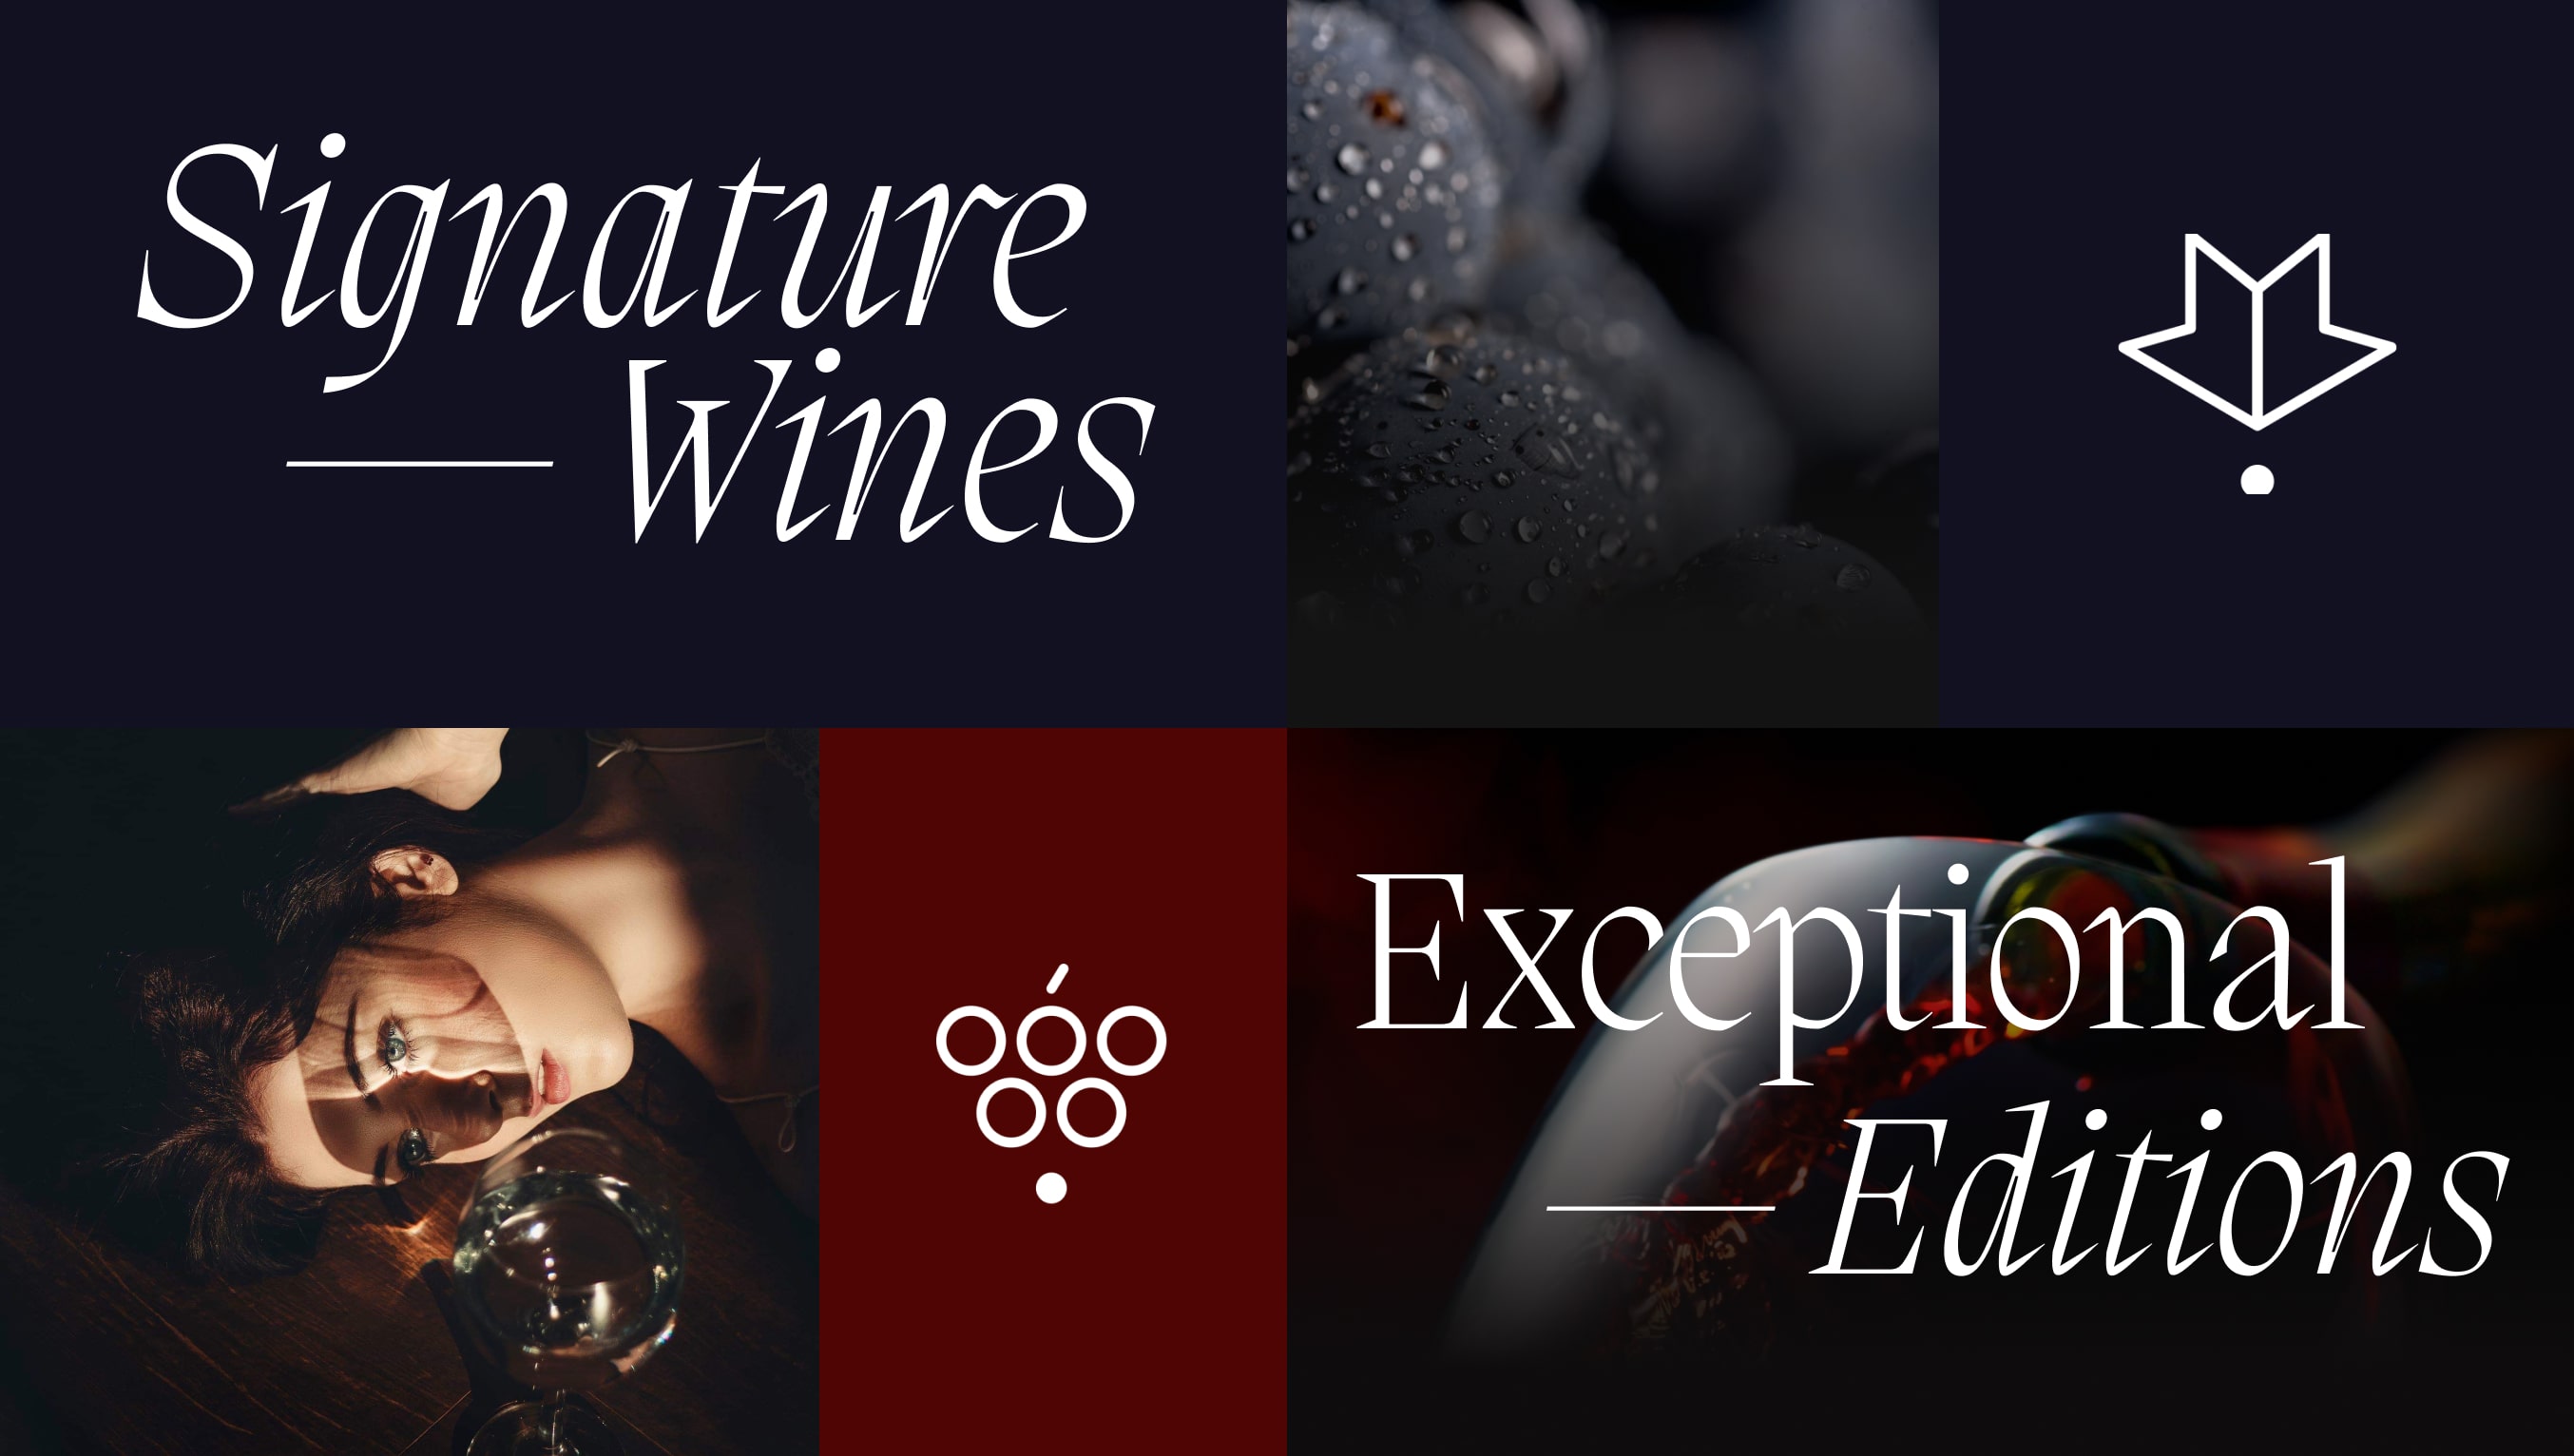 Araex Grands is a business group of independent winemakers and wineries that gathers family wineries from the most prestigious Designations of Origin in Spain and has been bringing the best Spanish wine to the world for more than 25 years.
